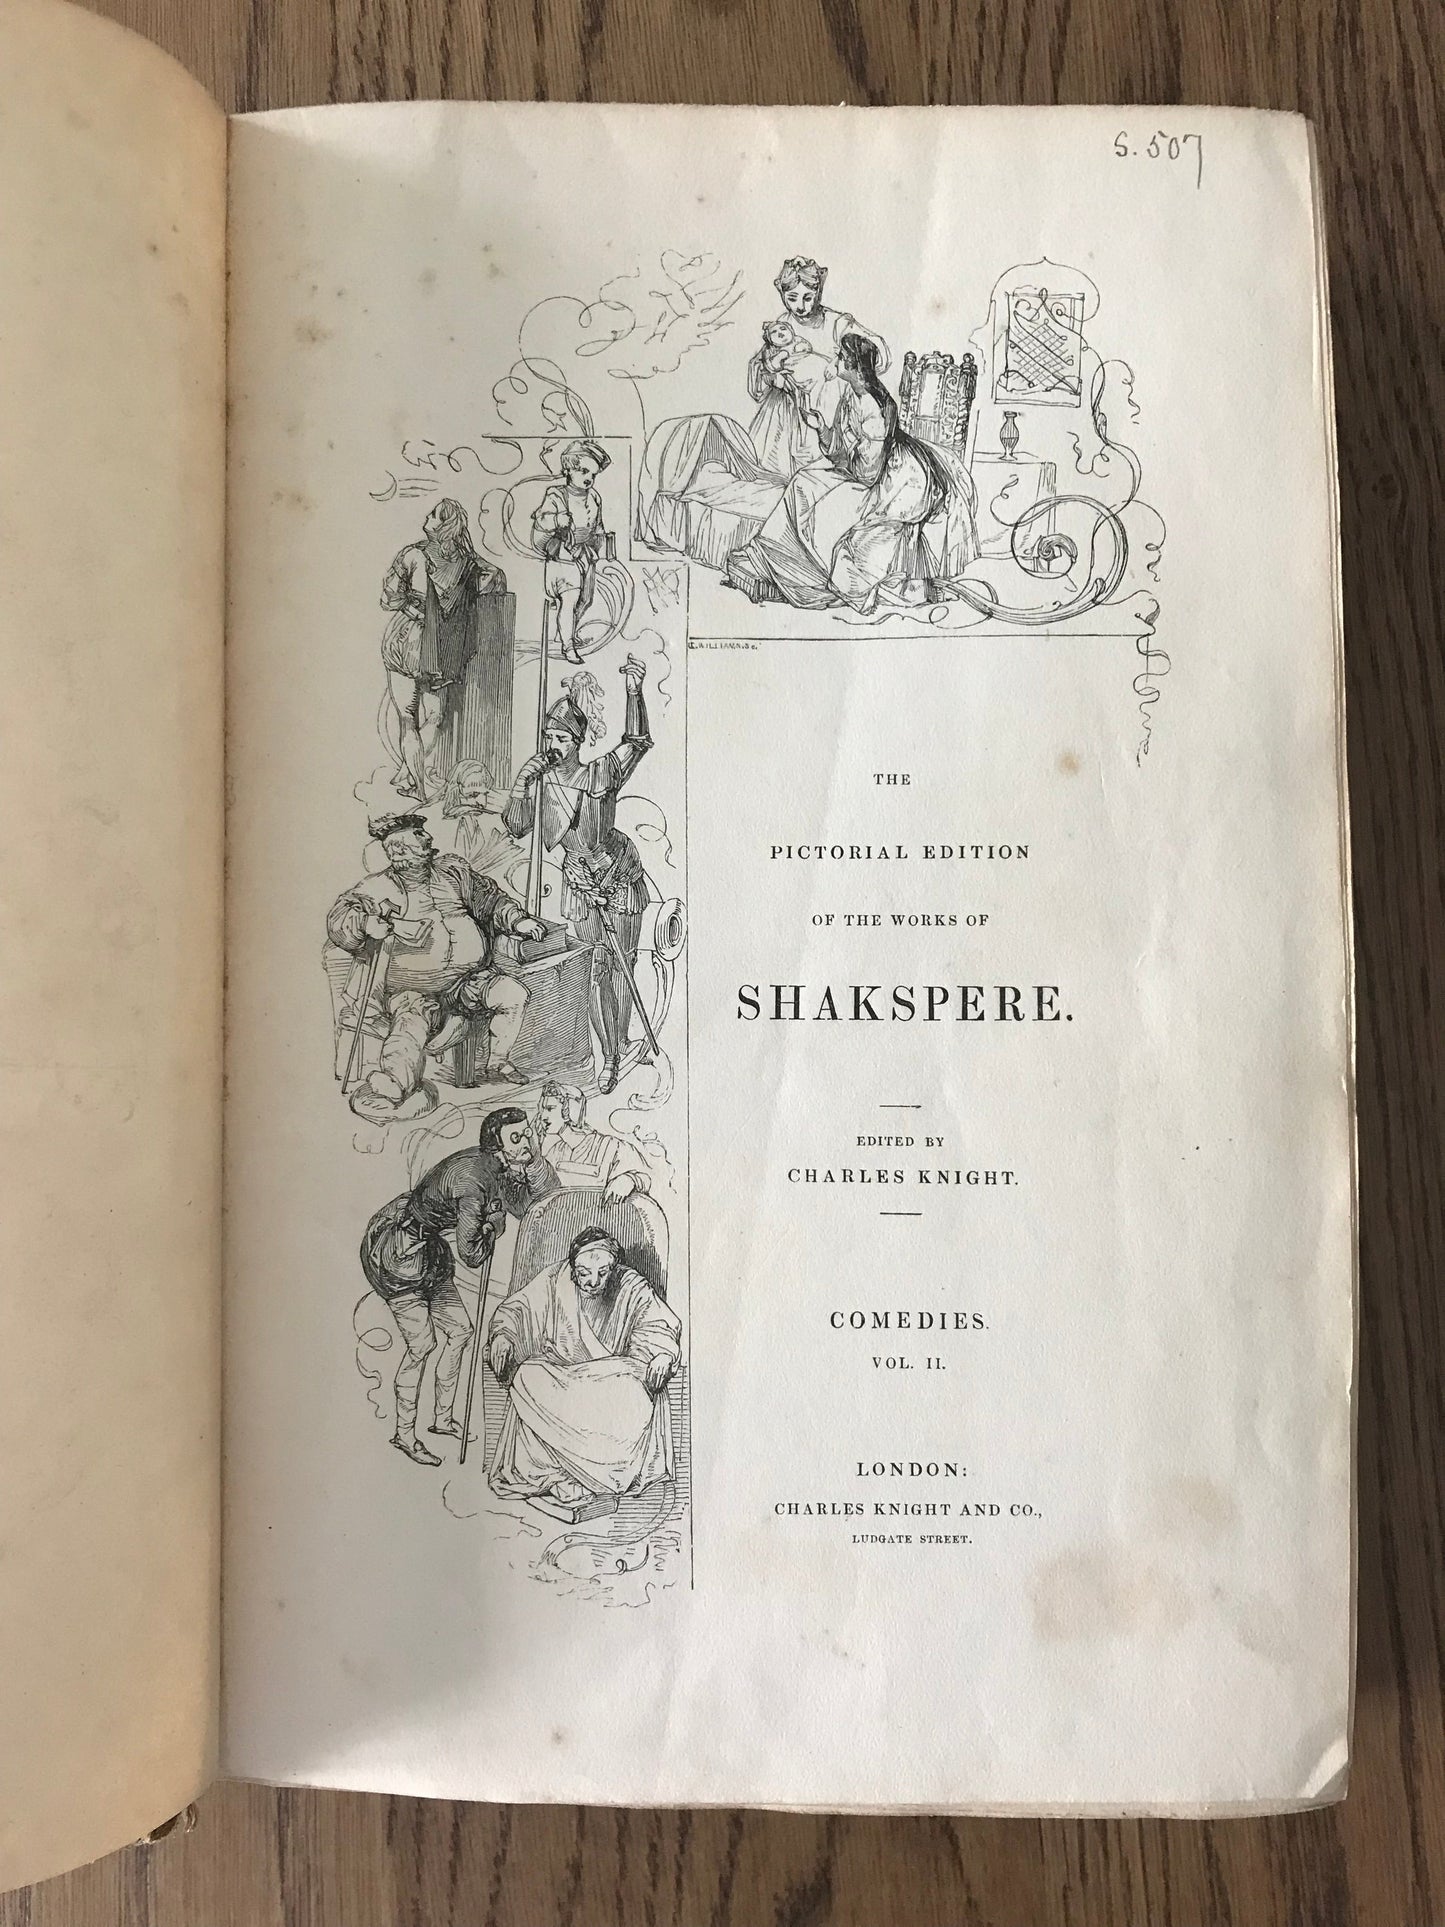 THE PICTORIAL EDITION OF THE WORKS OF SHAKSPERE - EDITED BY CHARLES KNIGHT BooksCardsNBikes